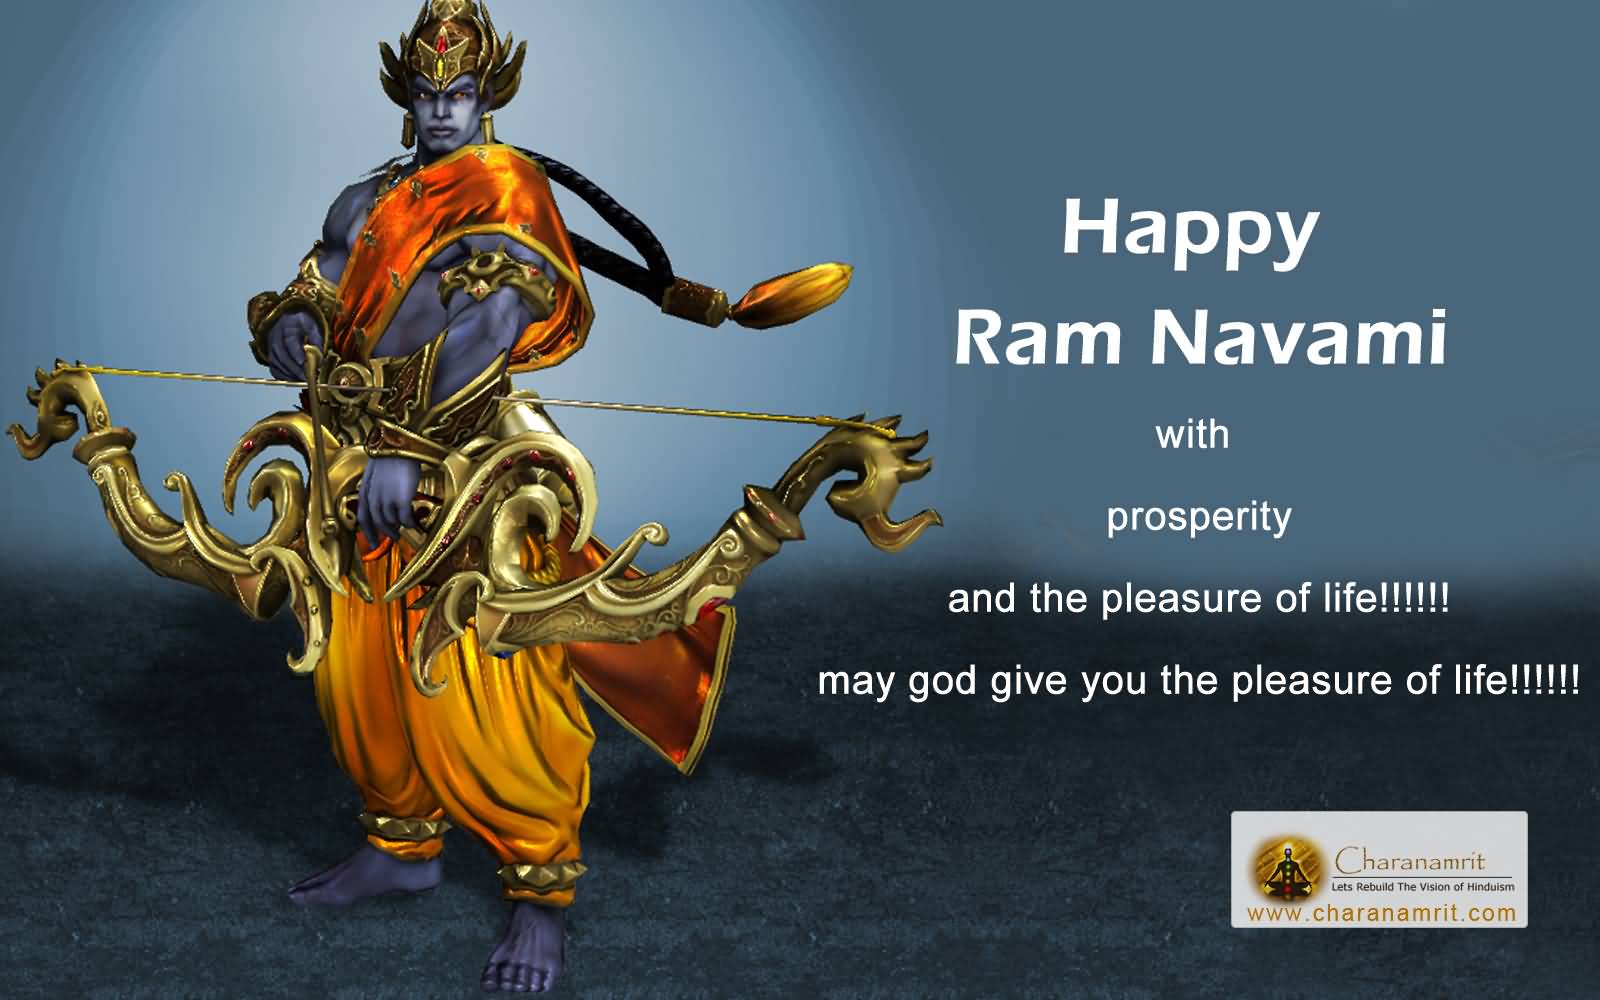 Happy Ram Navami With Prosperity And The Pleasure Of Life May God Give You The Pleasure Of Life